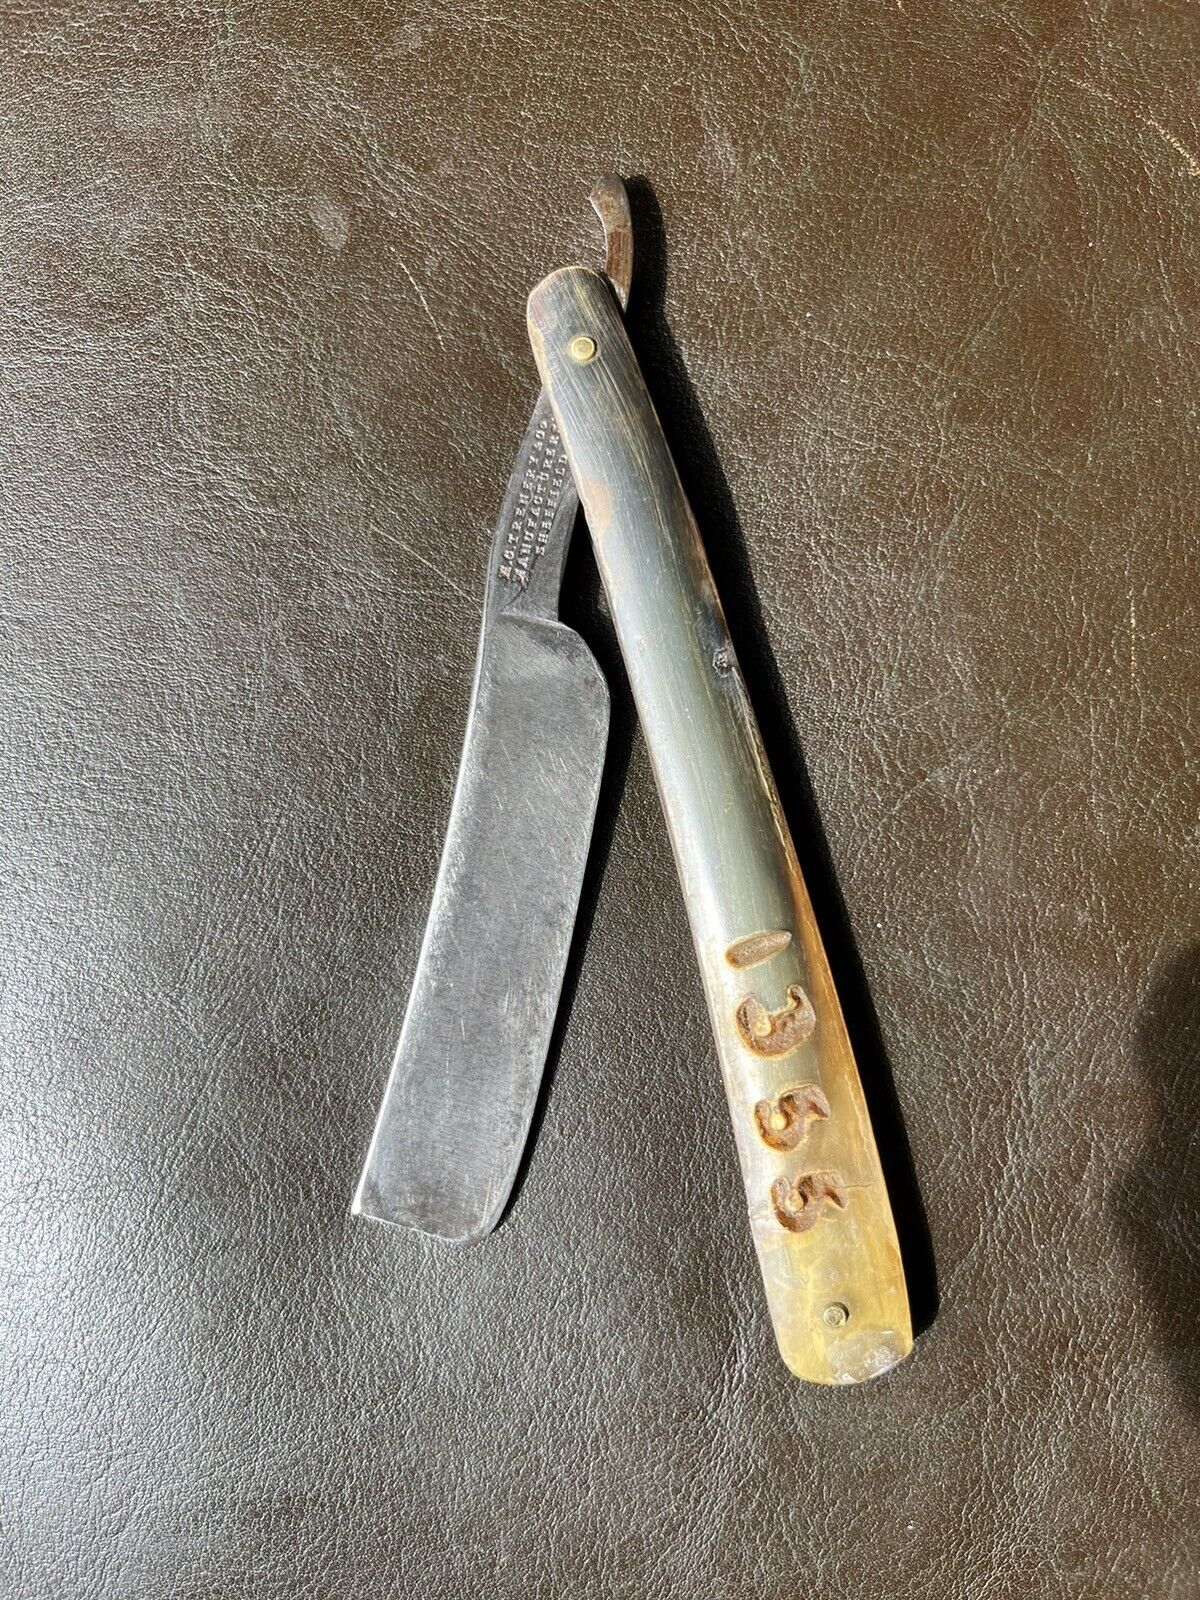 Antique Straight Razor By H. C. Trenery & Co. Sheffield 1800's (Historical Mark)